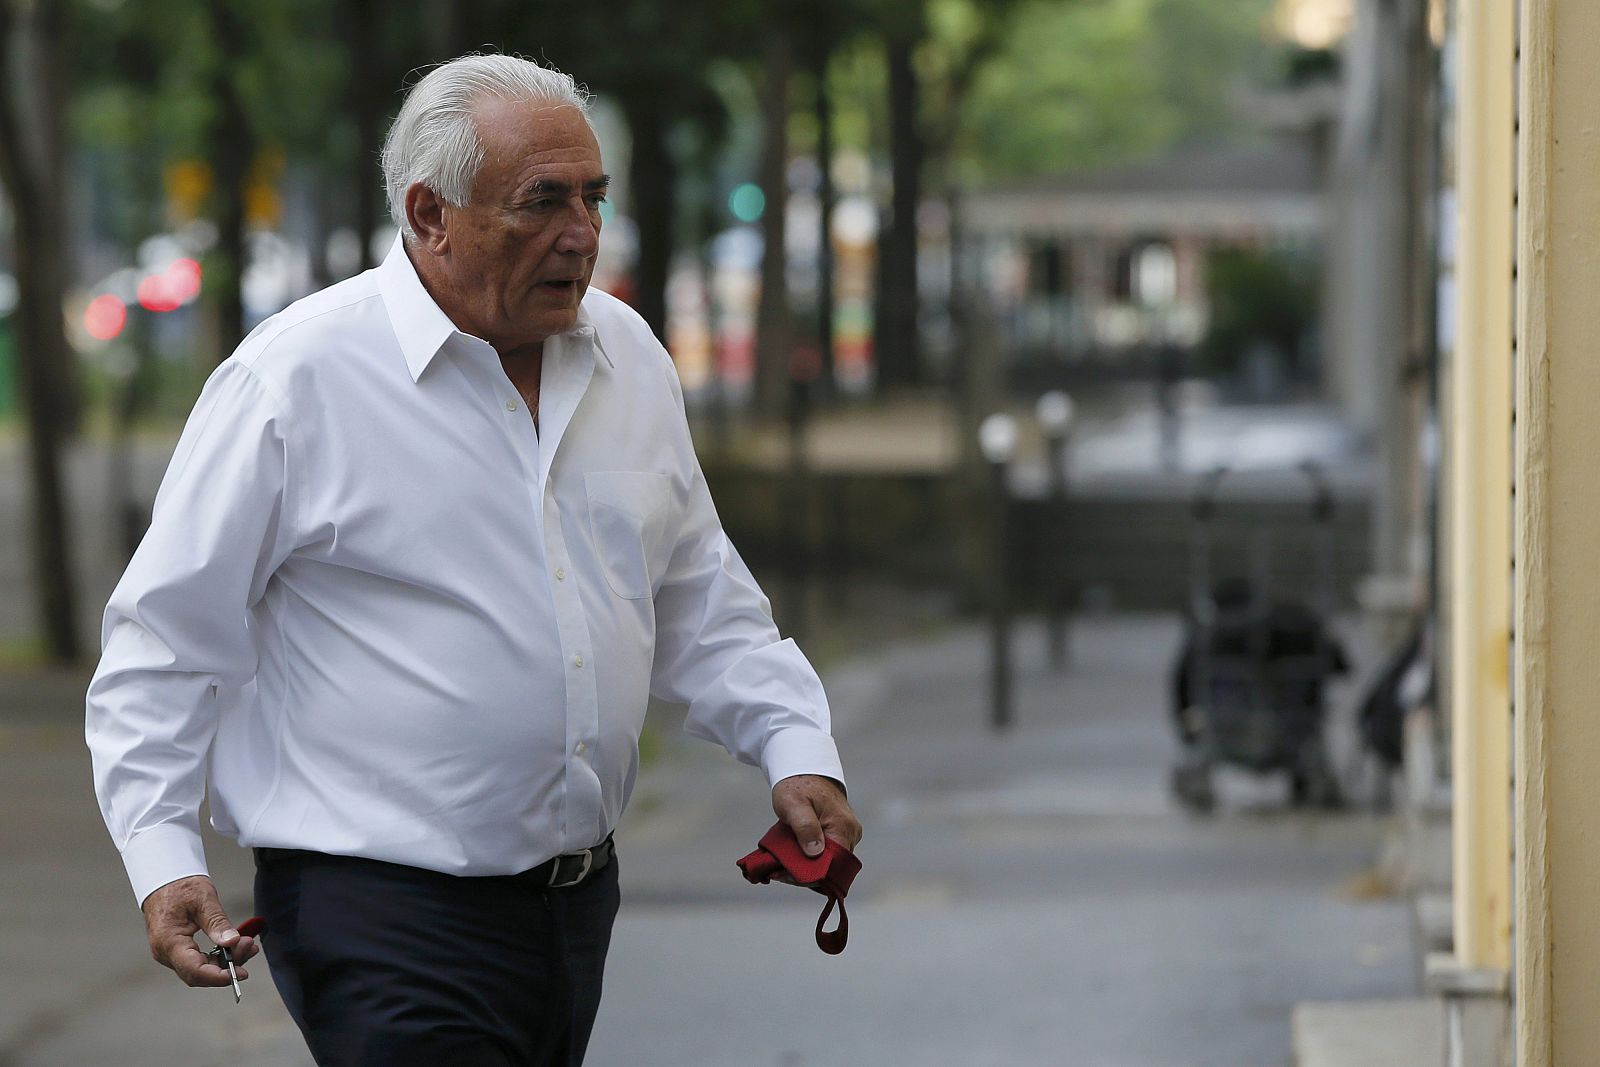 Former FMI head Dominique Strauss-Kahn holds keys and a tie as he walks towards his apartment in Paris